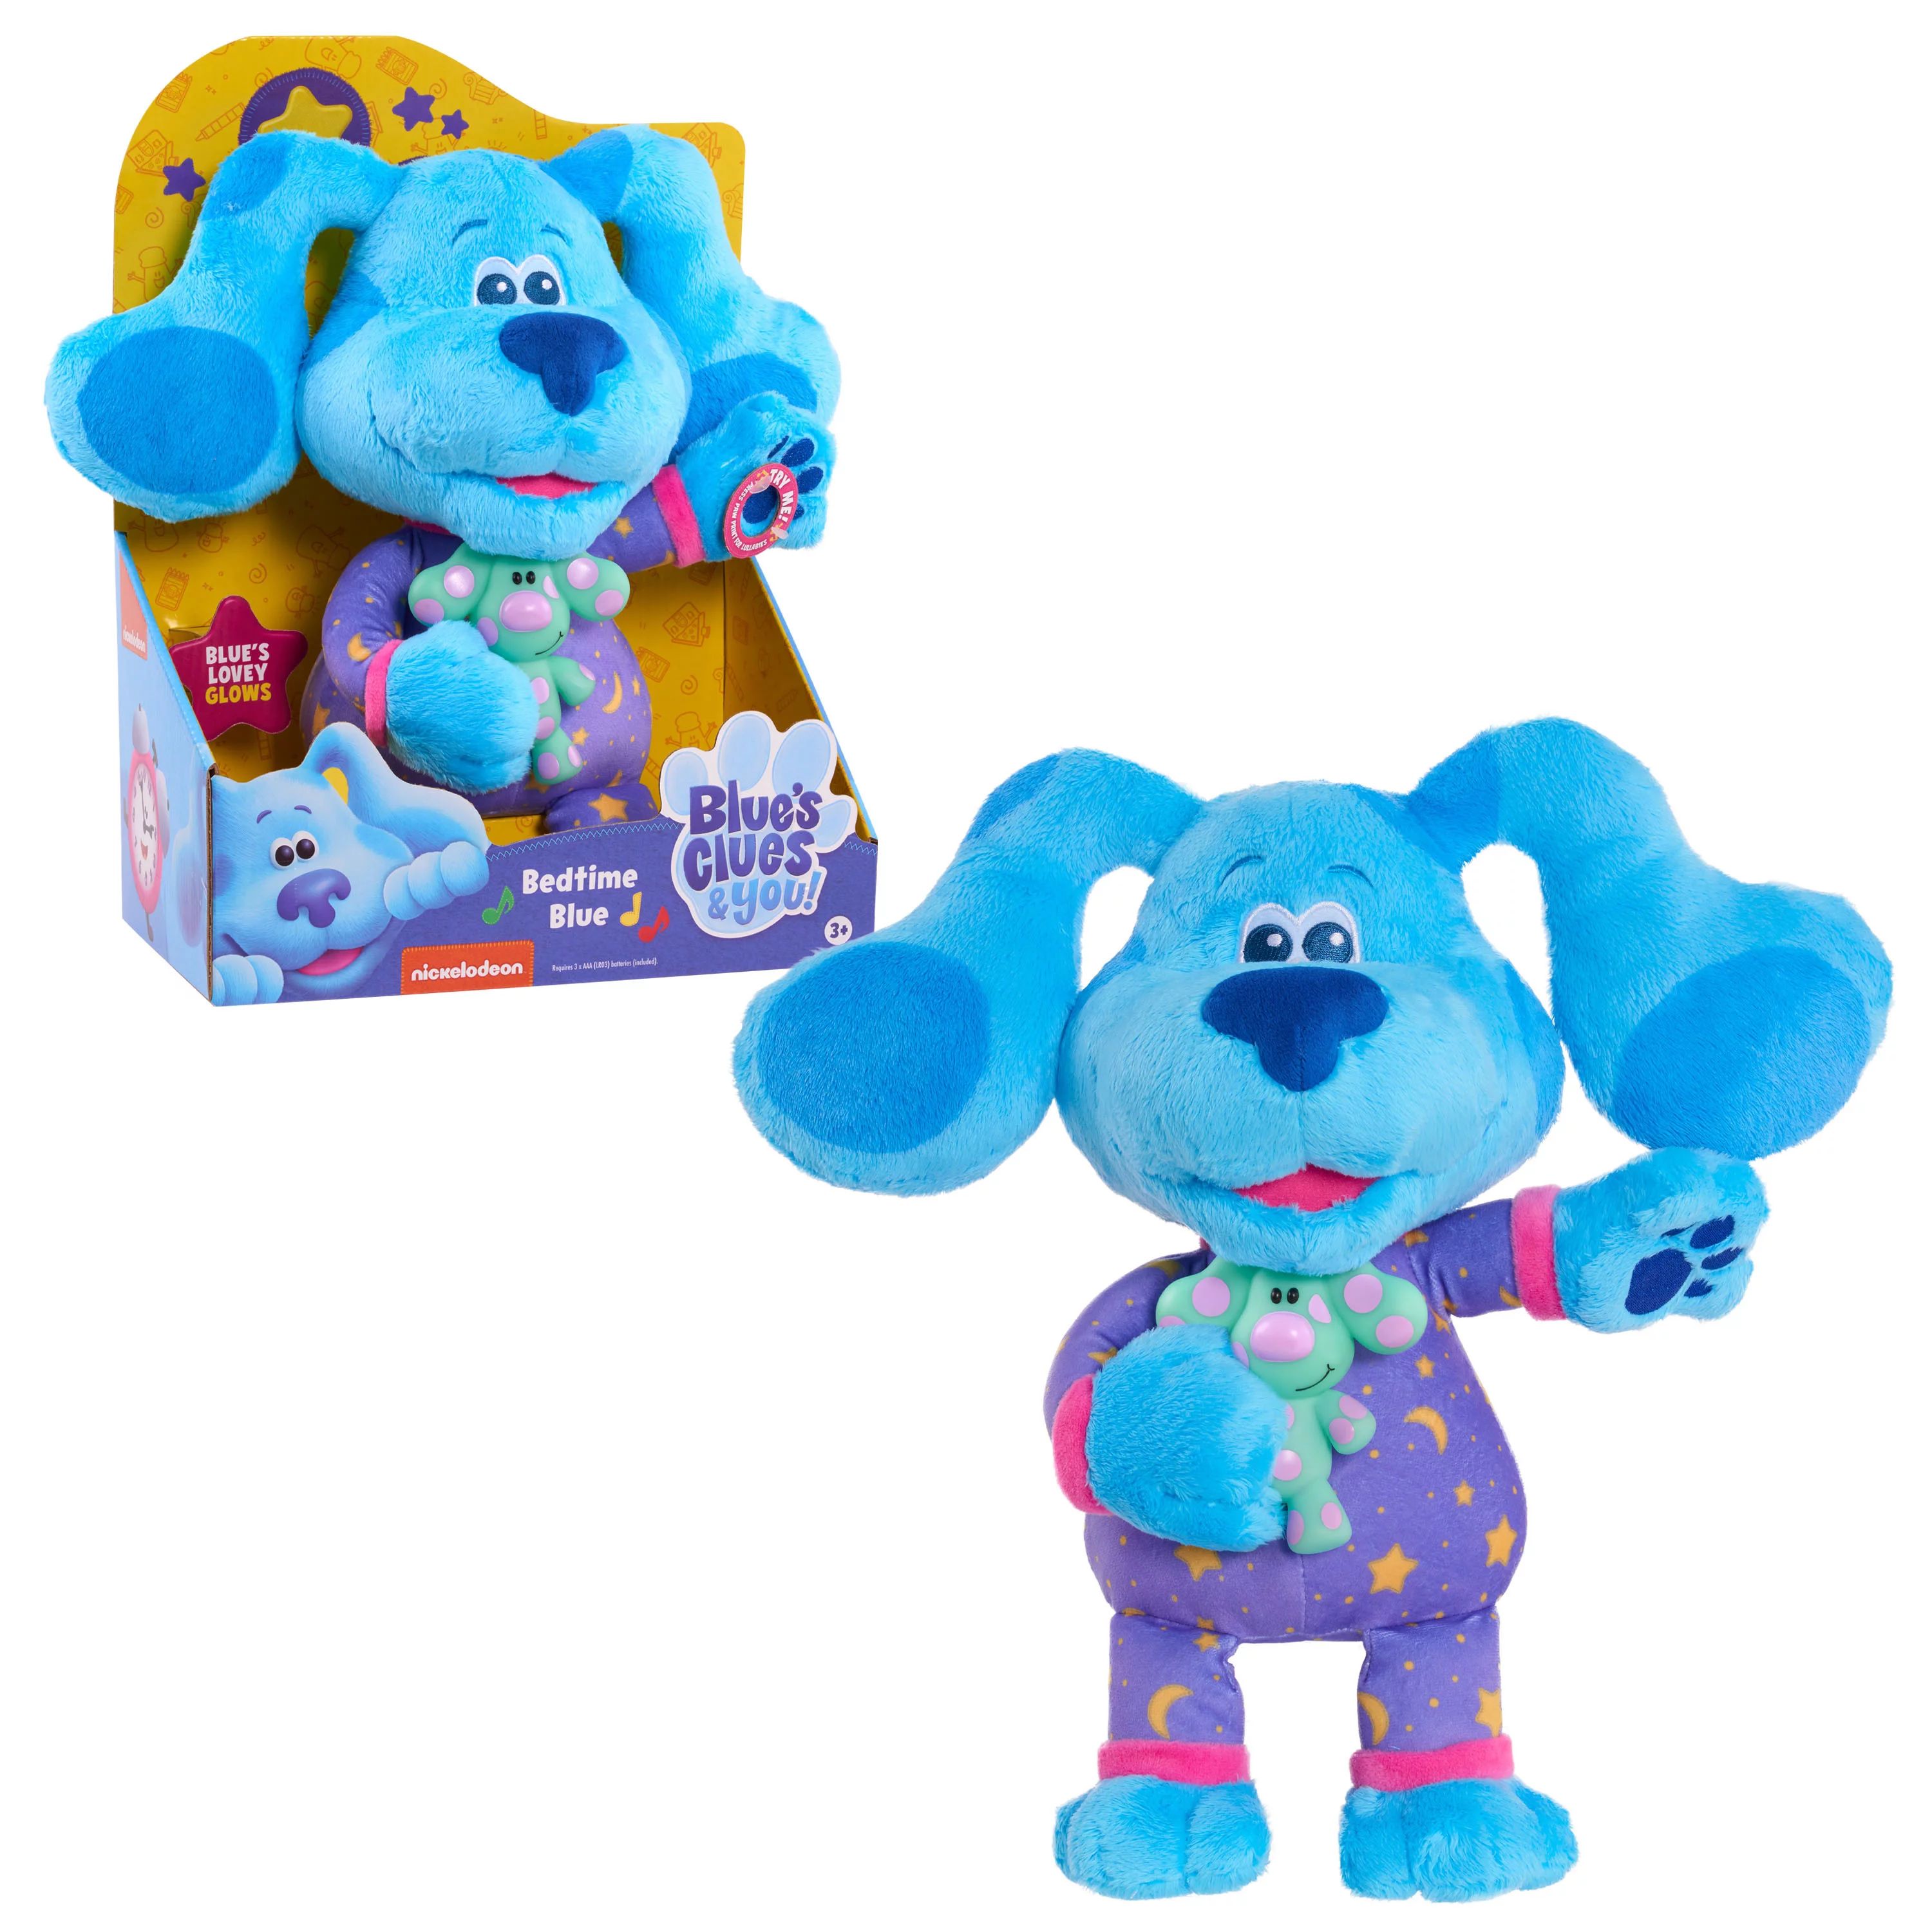 Blue’s Clues & You! Bedtime Blue 13-inch Plush, Light-Up and Musical Stuffed Animal, Dog, Kids ... | Walmart (US)